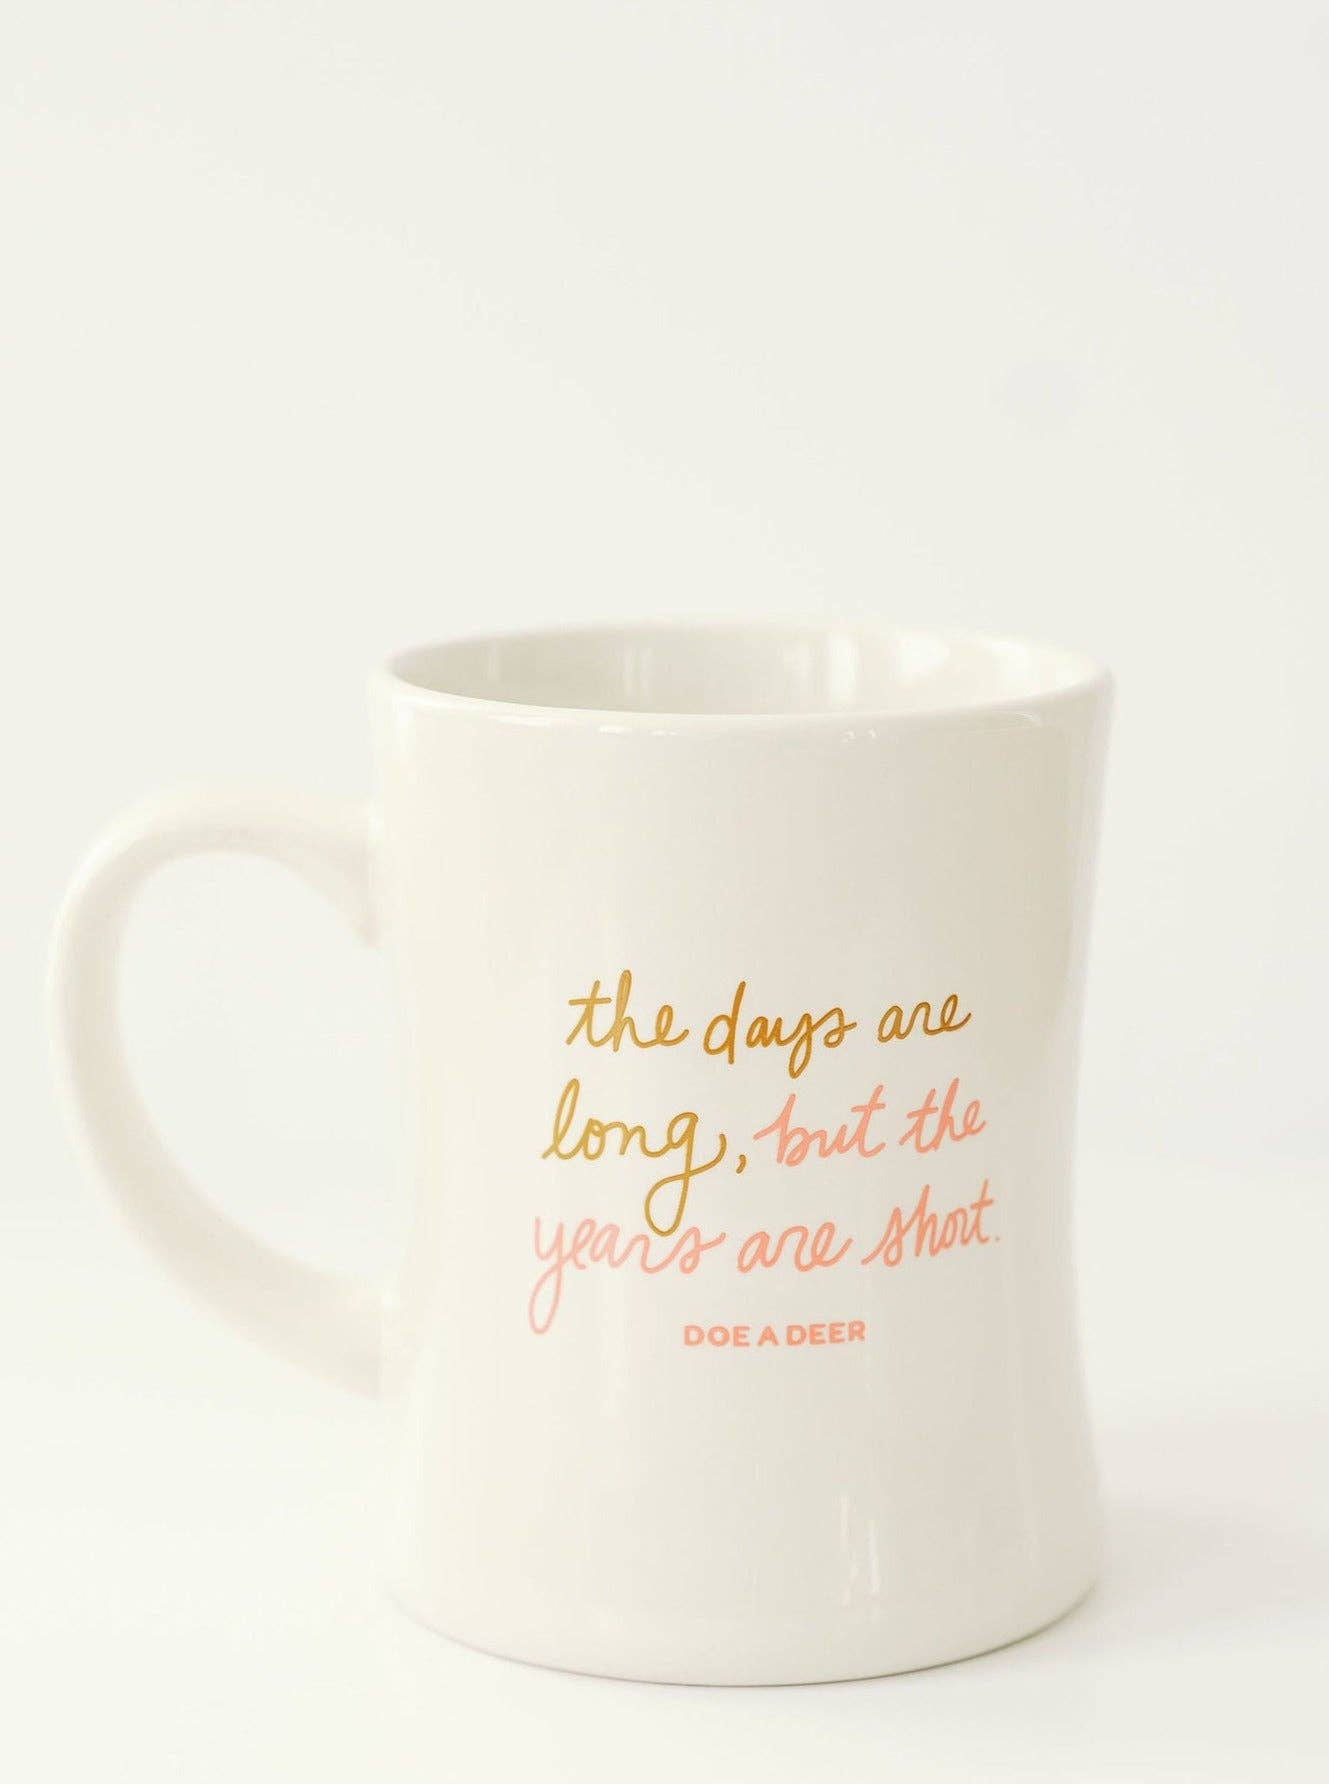 This closeup shows the color of the text, a beautiful gold and coral combo on a white, modern coffee mug. 